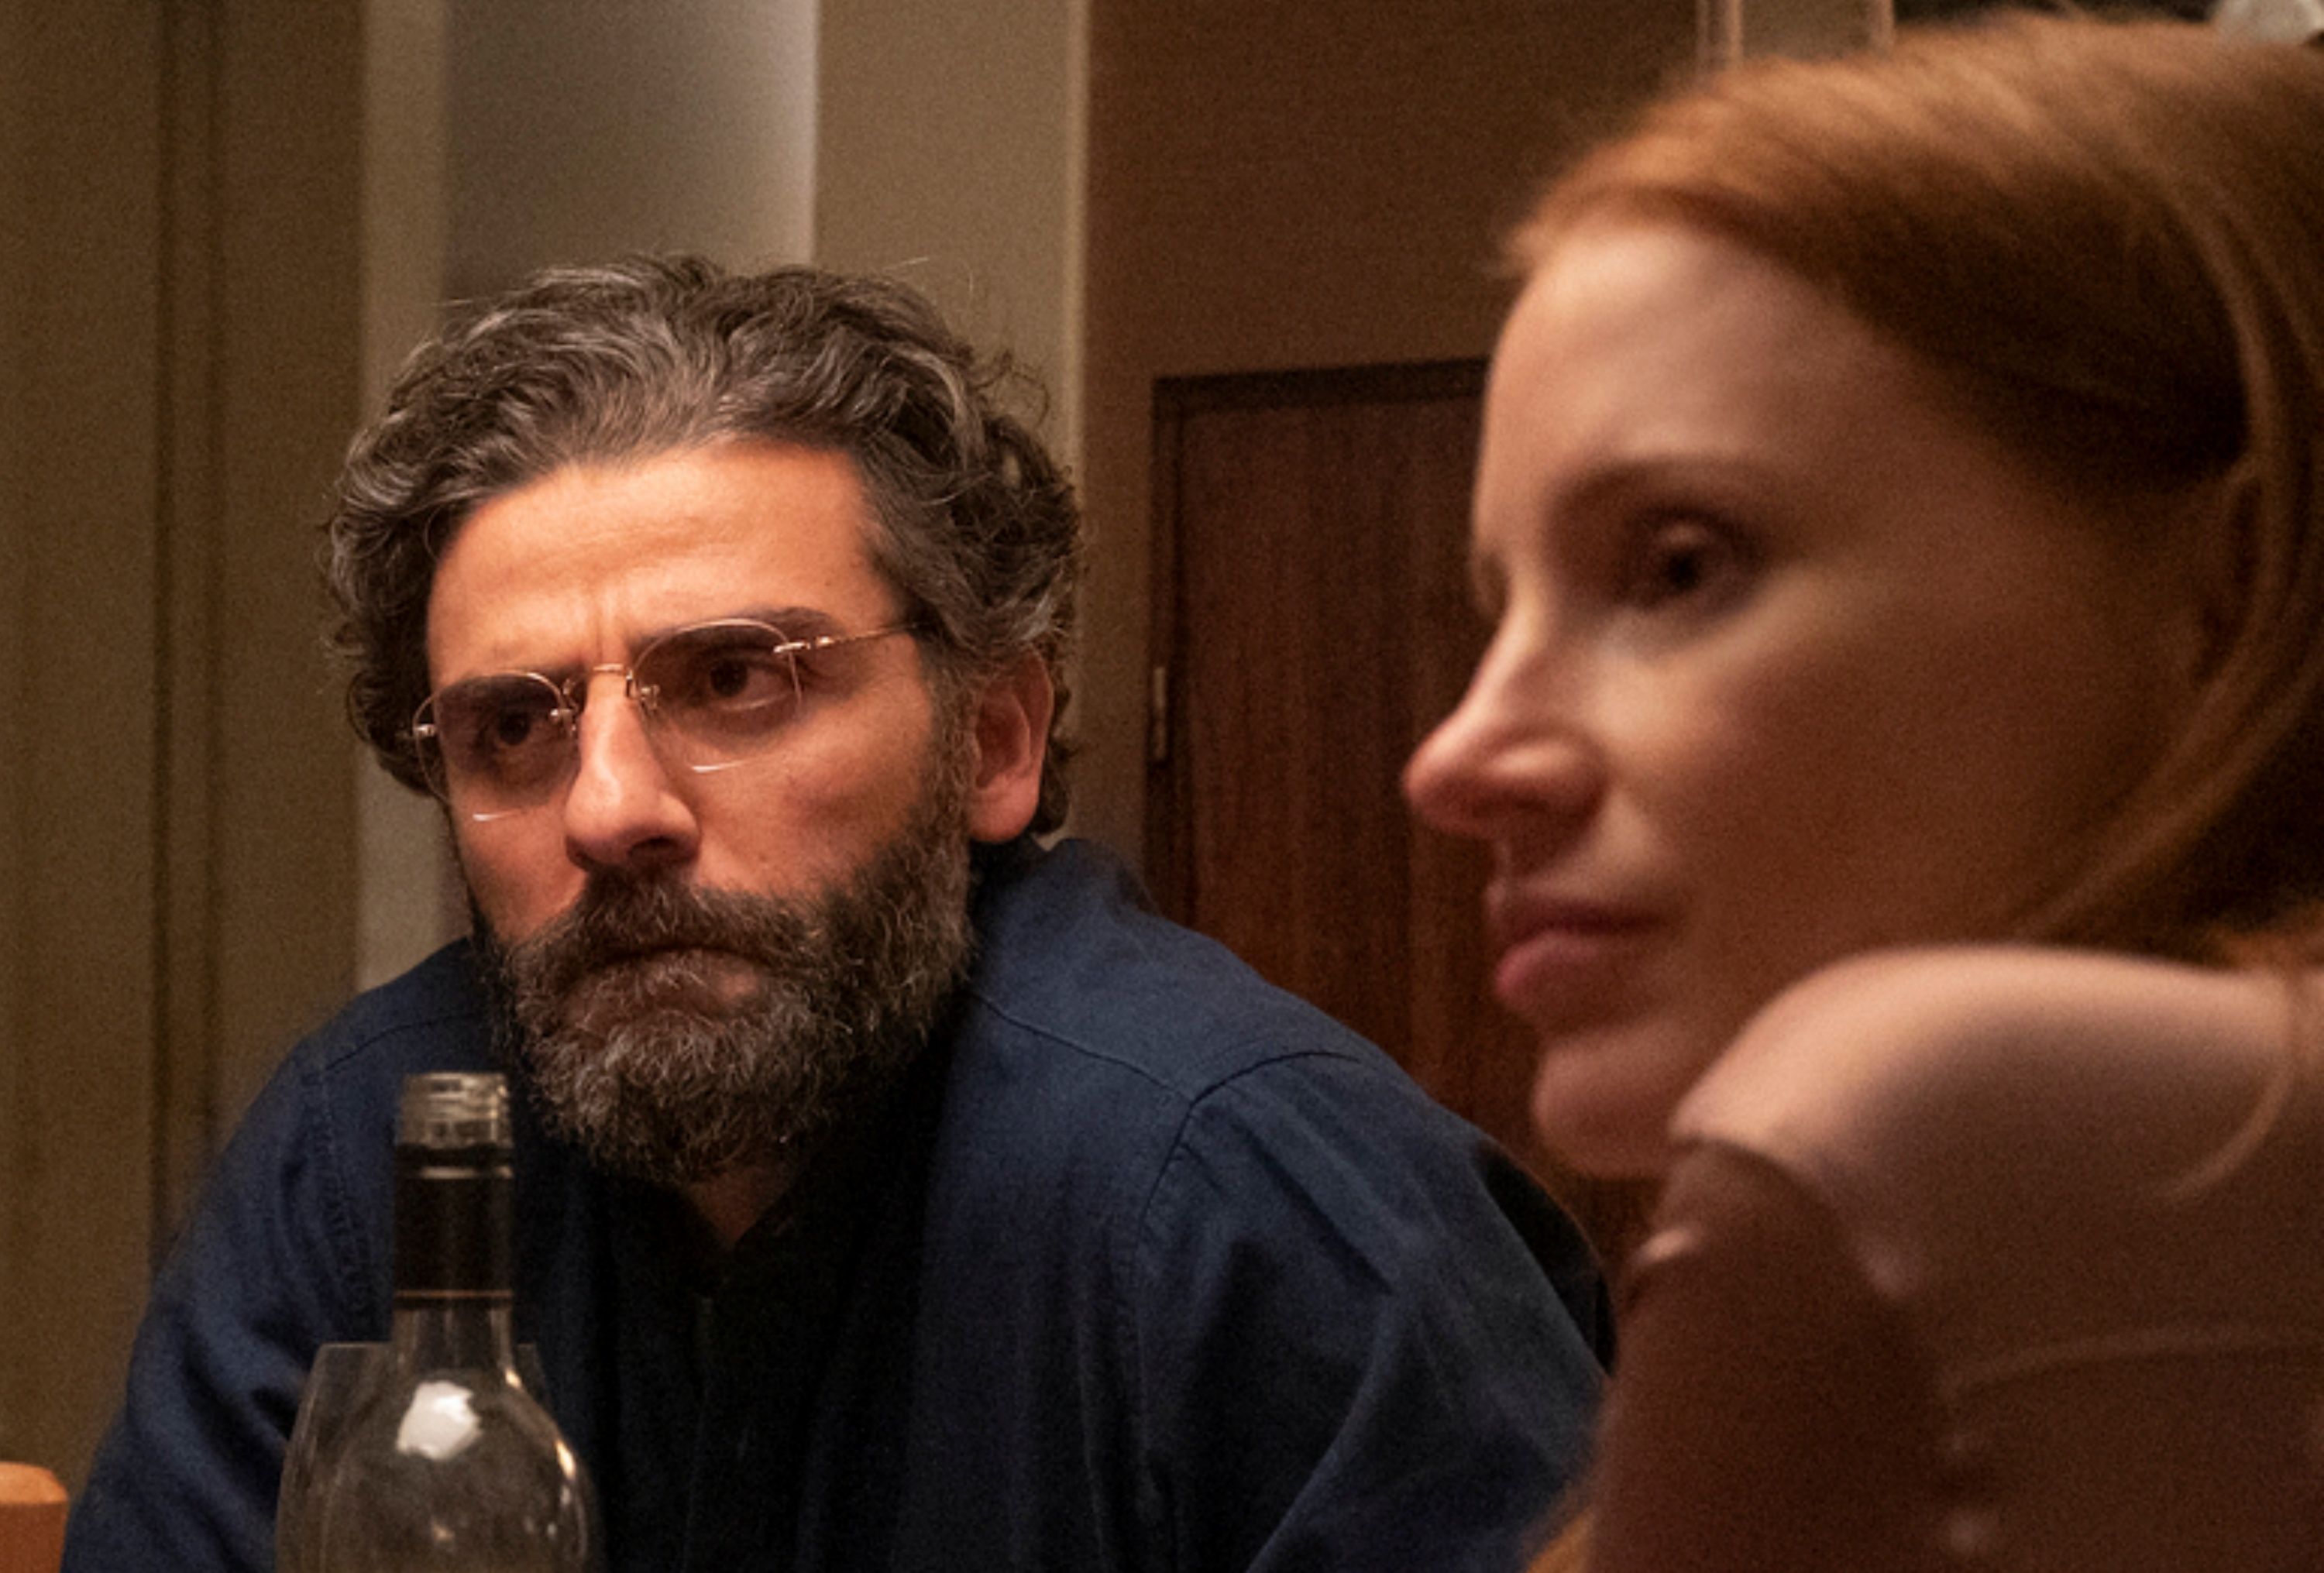 scenes-from-a-marriage-jessica-chastain-oscar-isaac-06